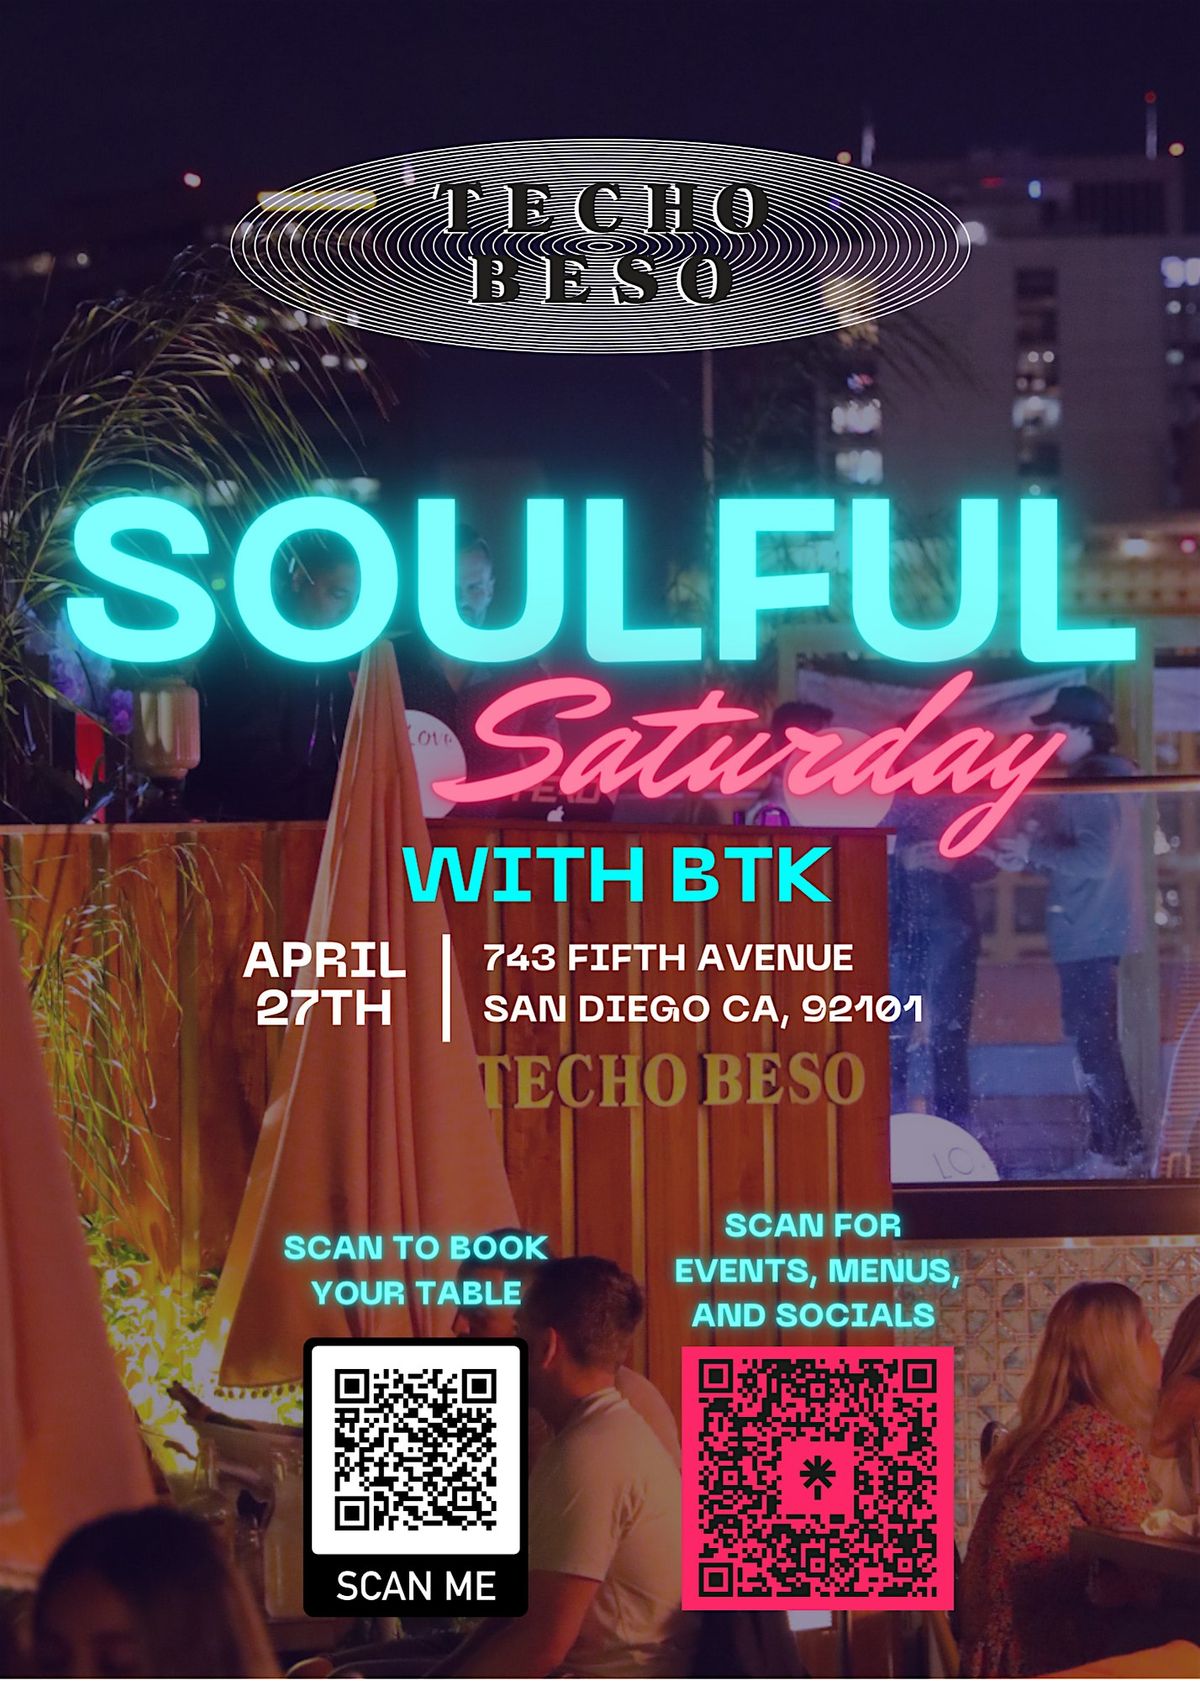 Soulful Saturday with BTK